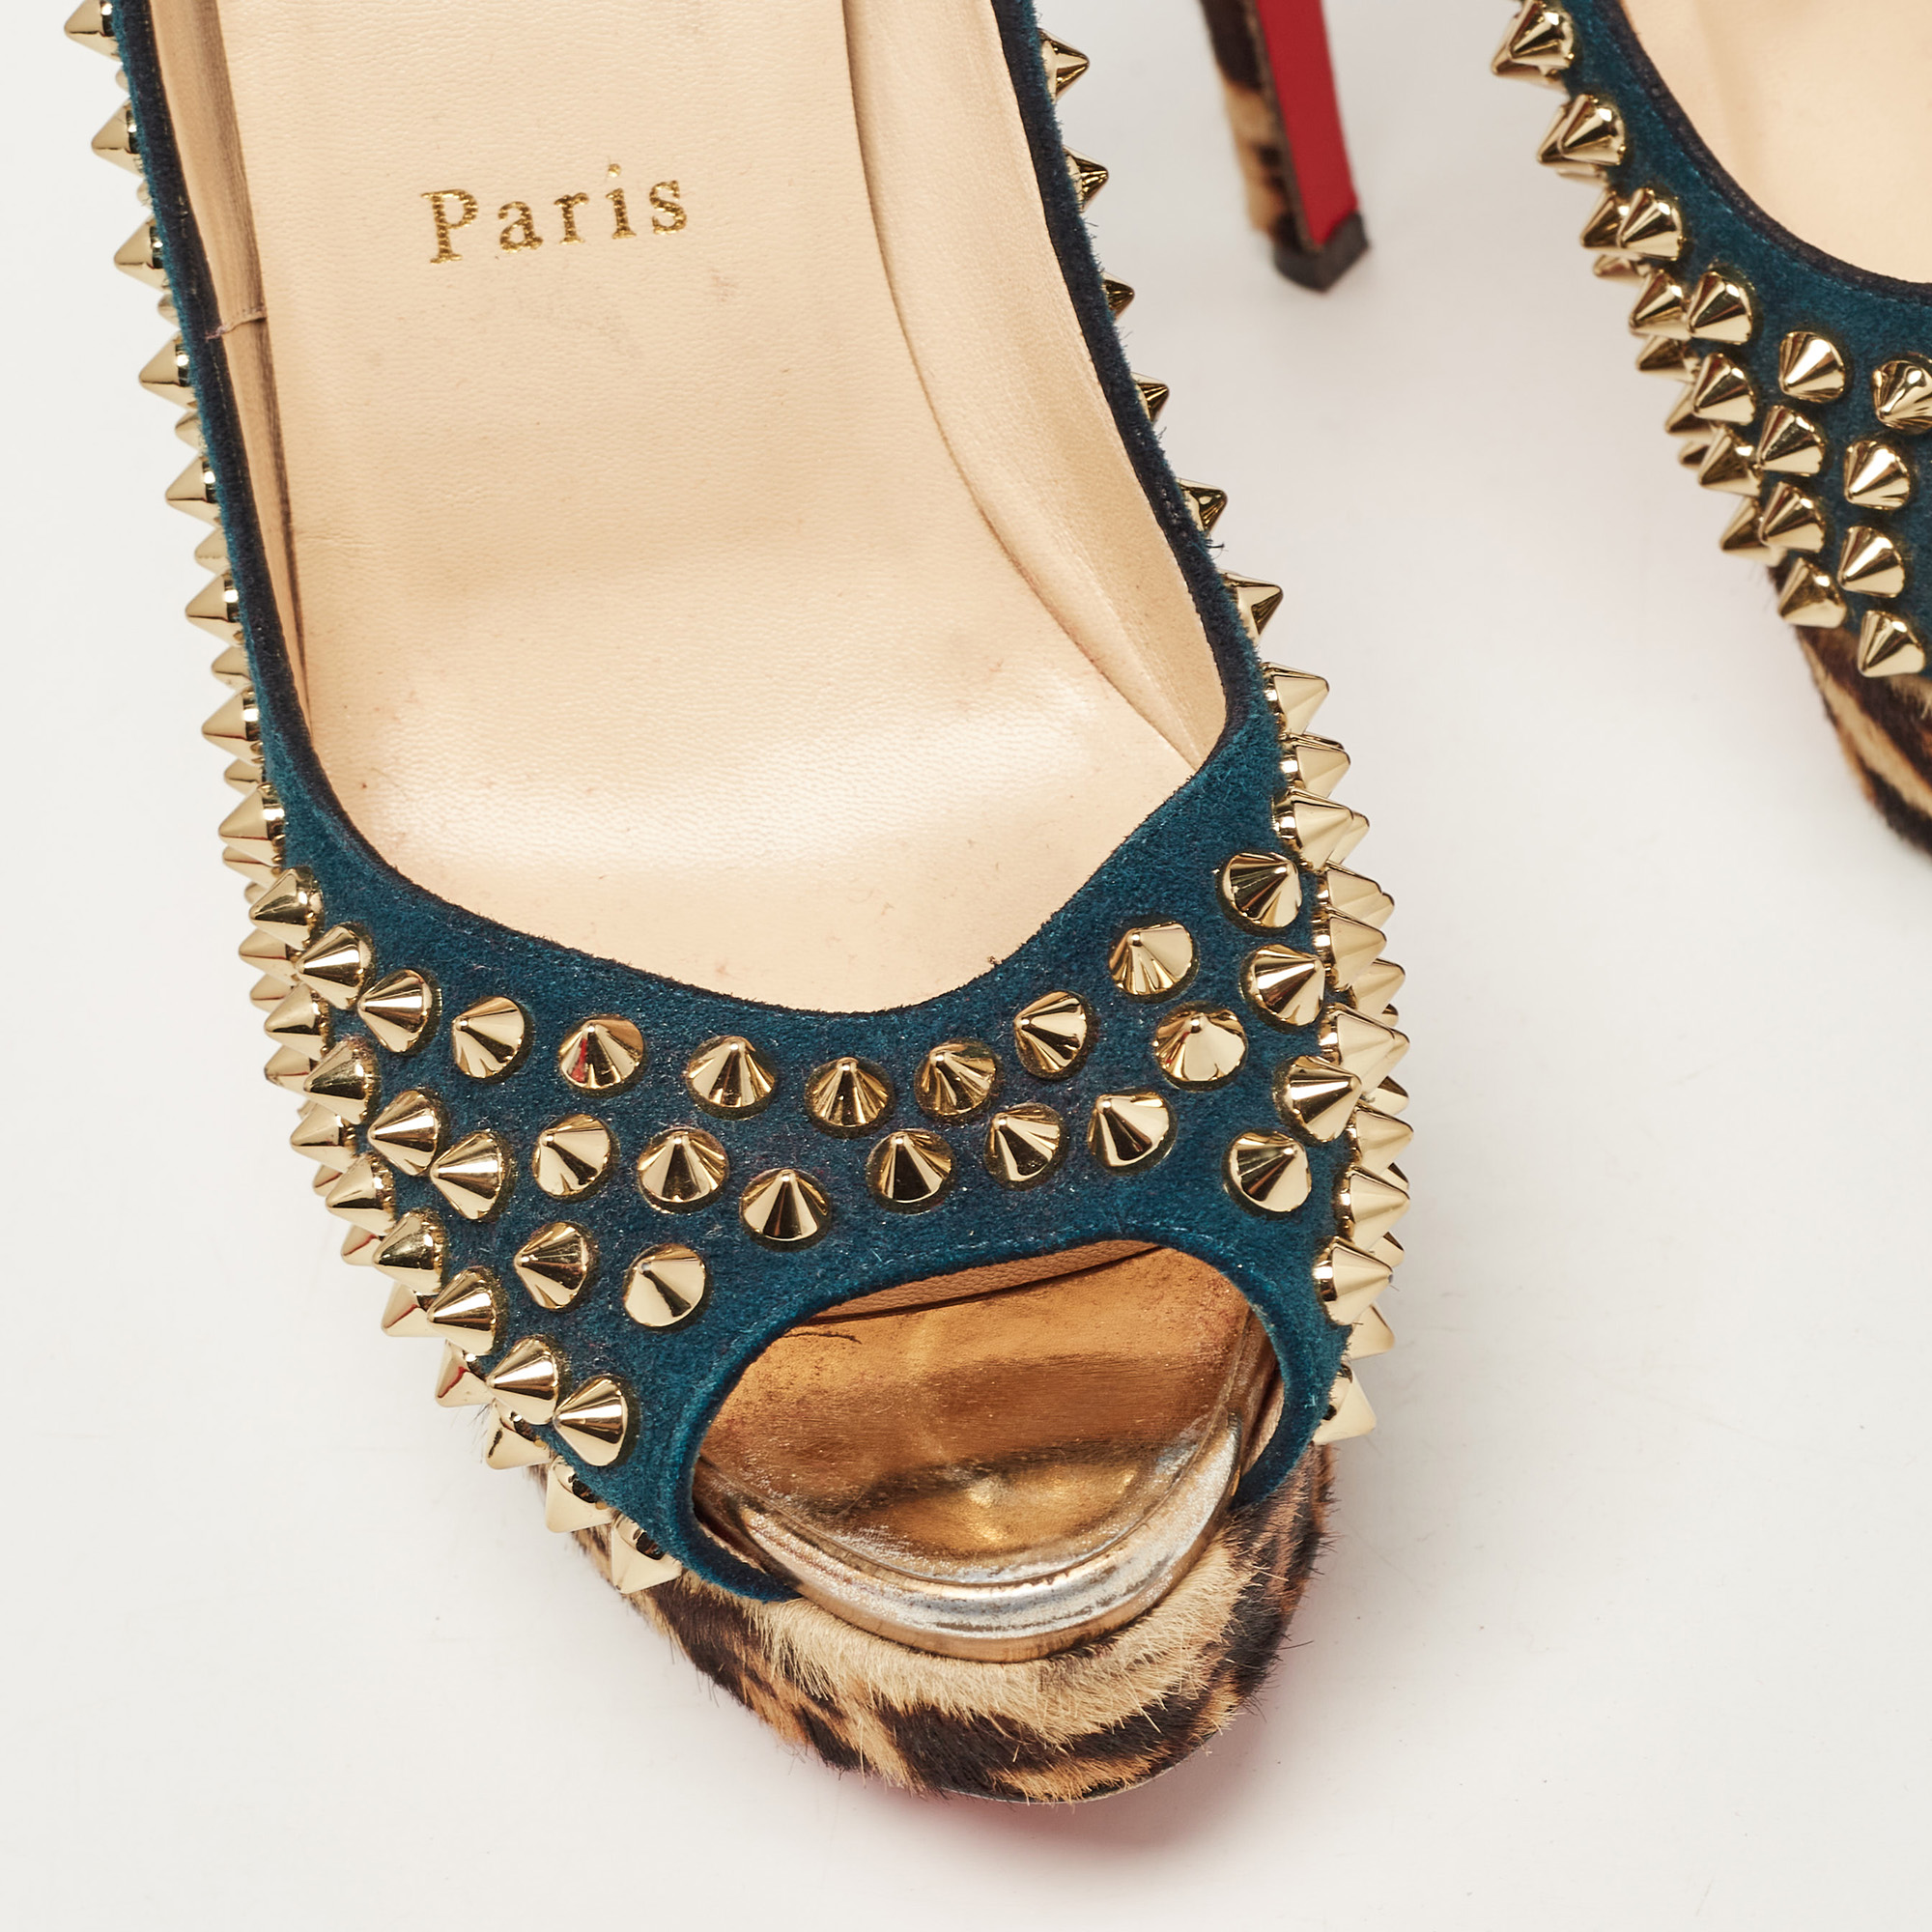 Christian Louboutin Multicolor Suede And Leopard Calf Hair Lady Peep Spikes Platform Pumps Size 36.5